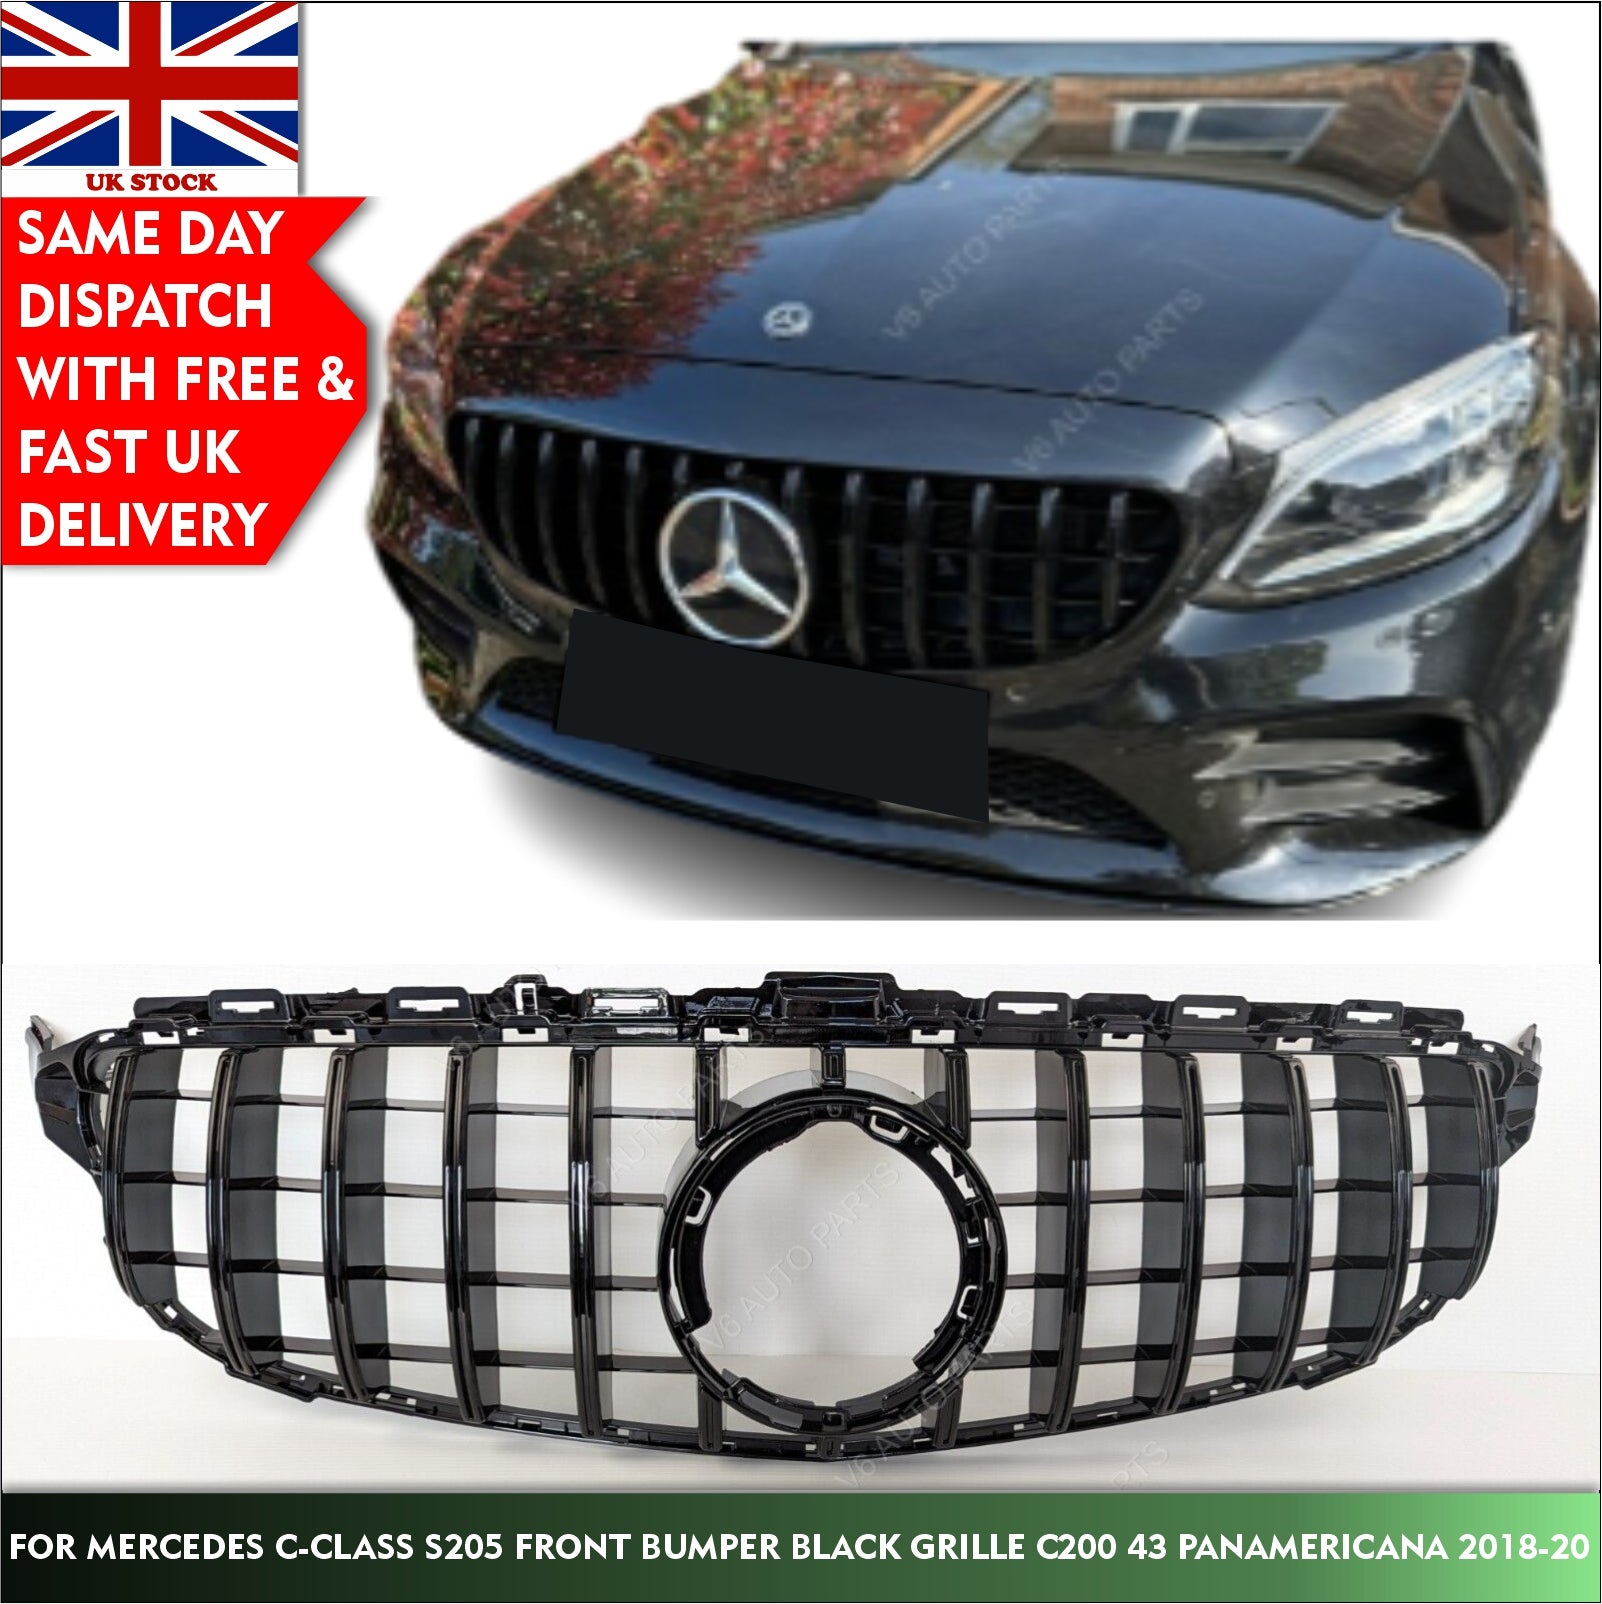 For Mercedes C-Class S205 Front Bumper Black Grille C200 43 2018-20 Panamericana Grill